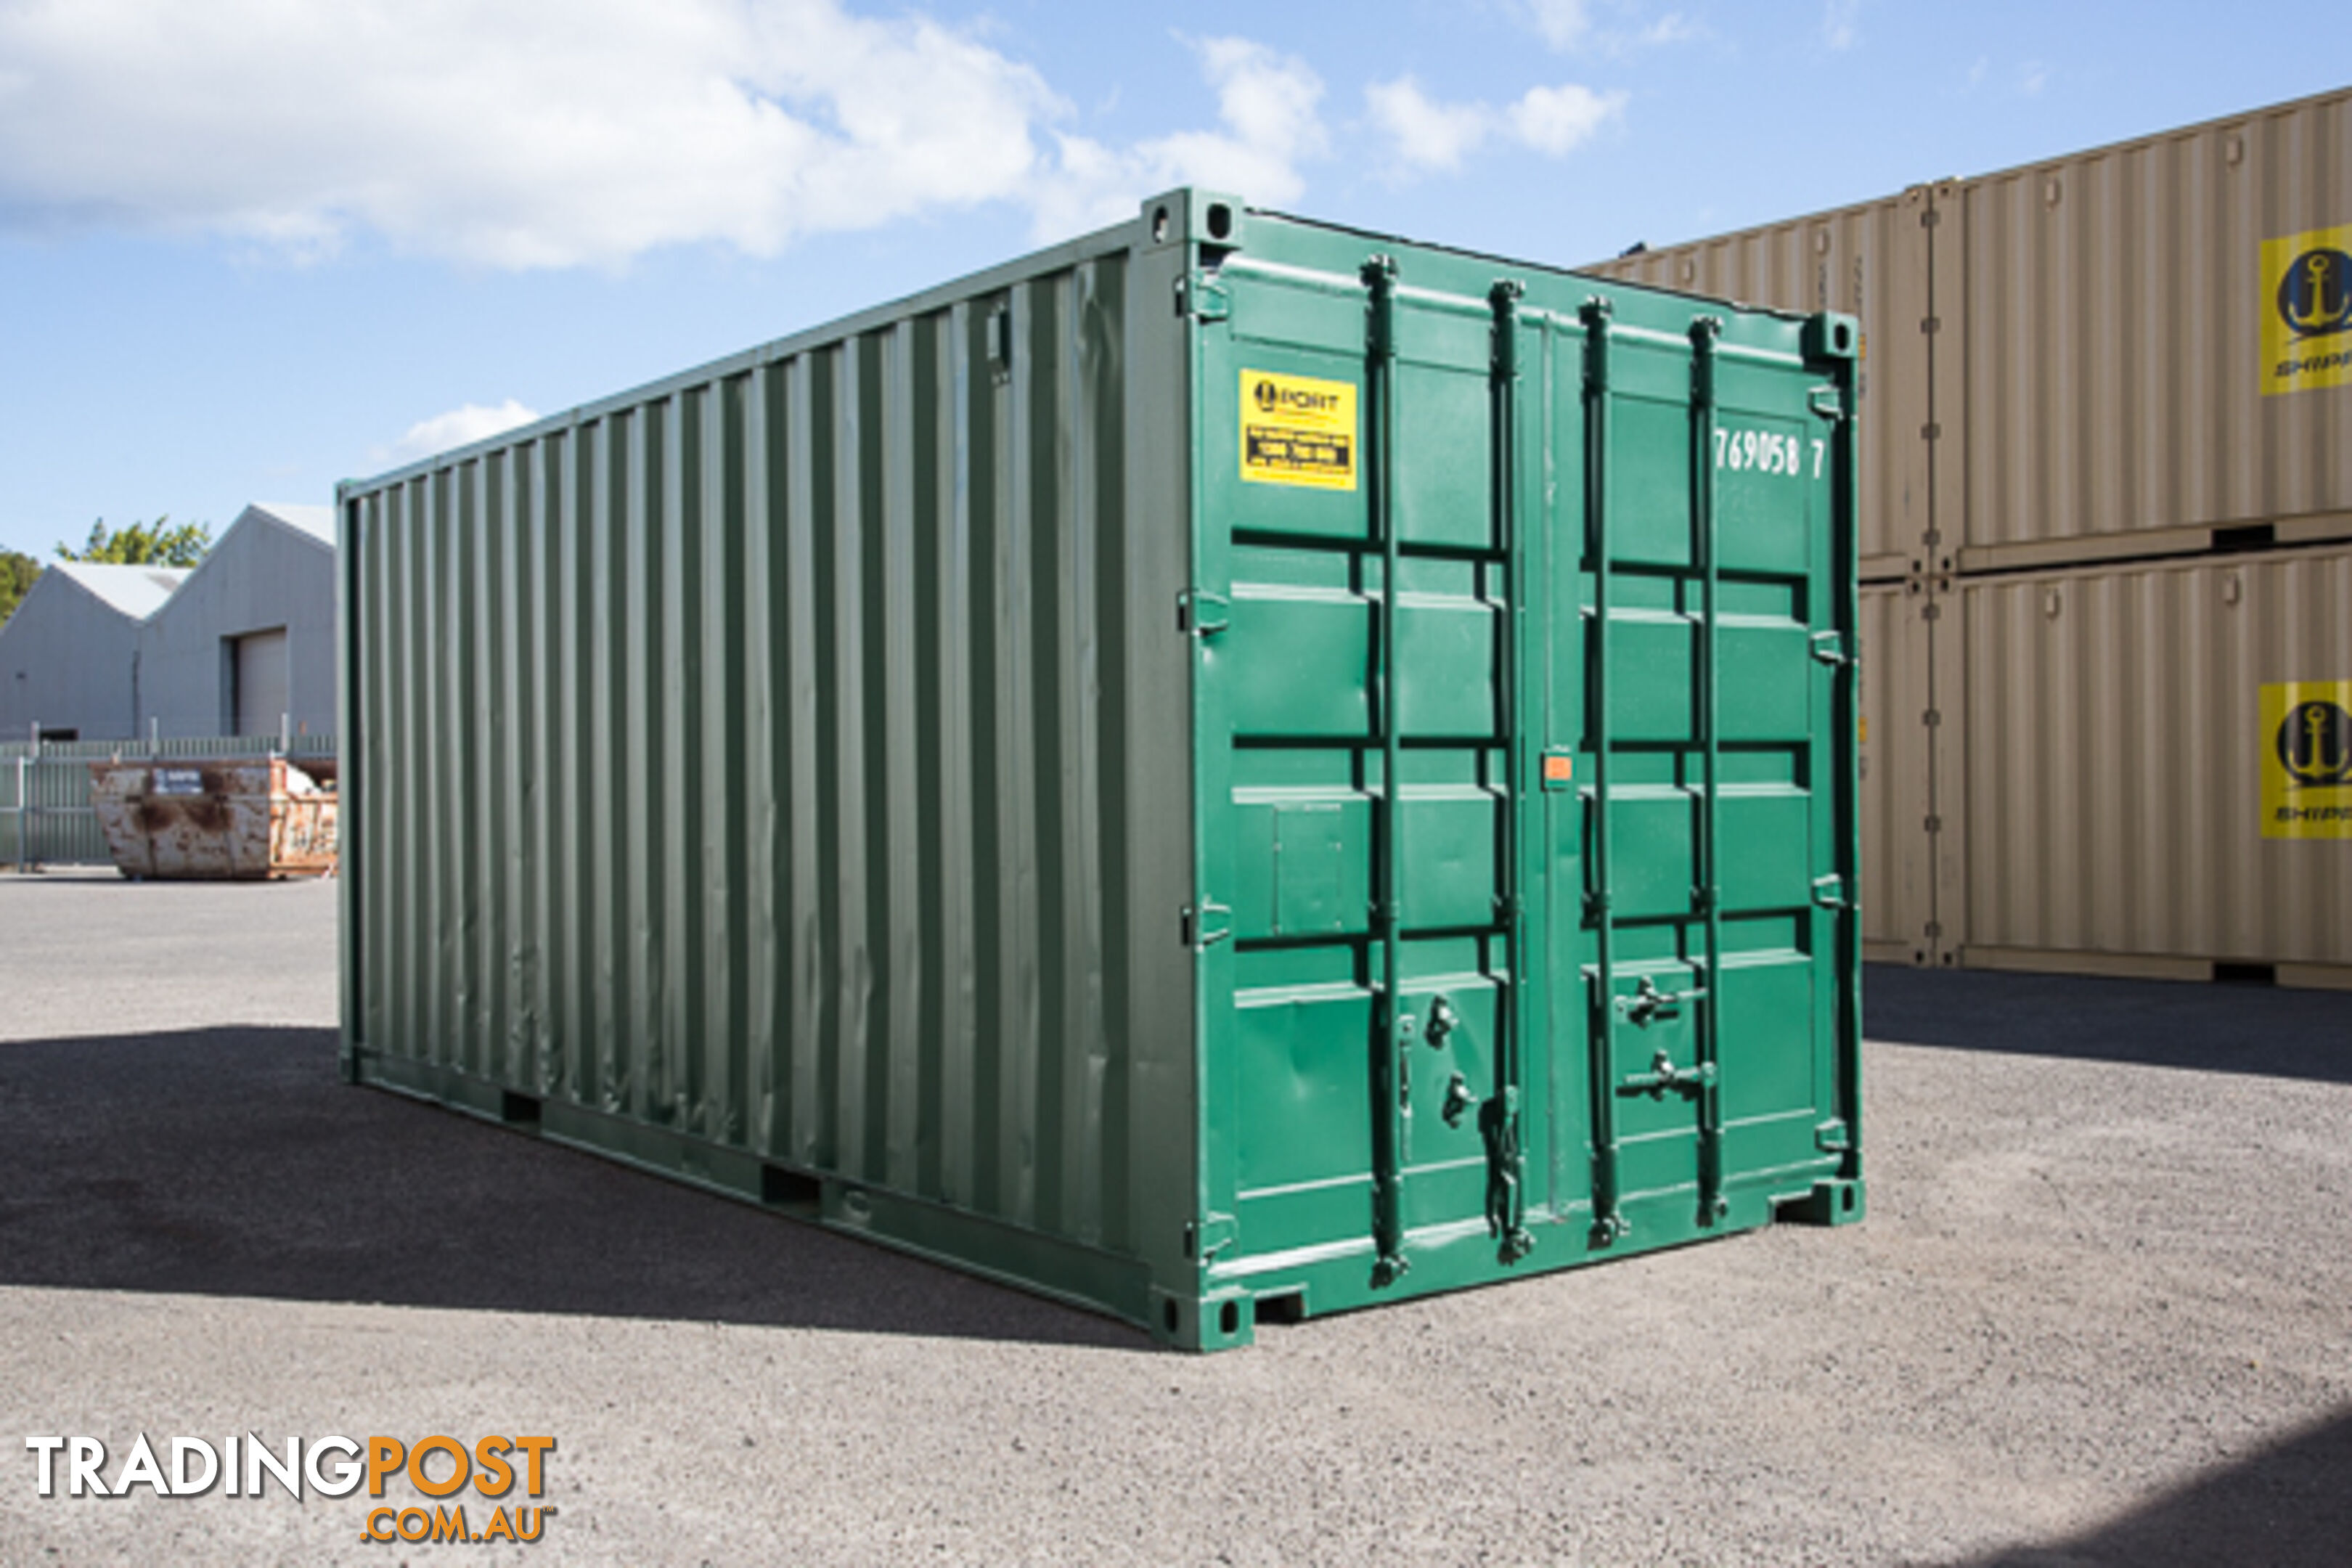 Refurbished Painted 20ft Shipping Containers Gungahlin - From $4650 + GST